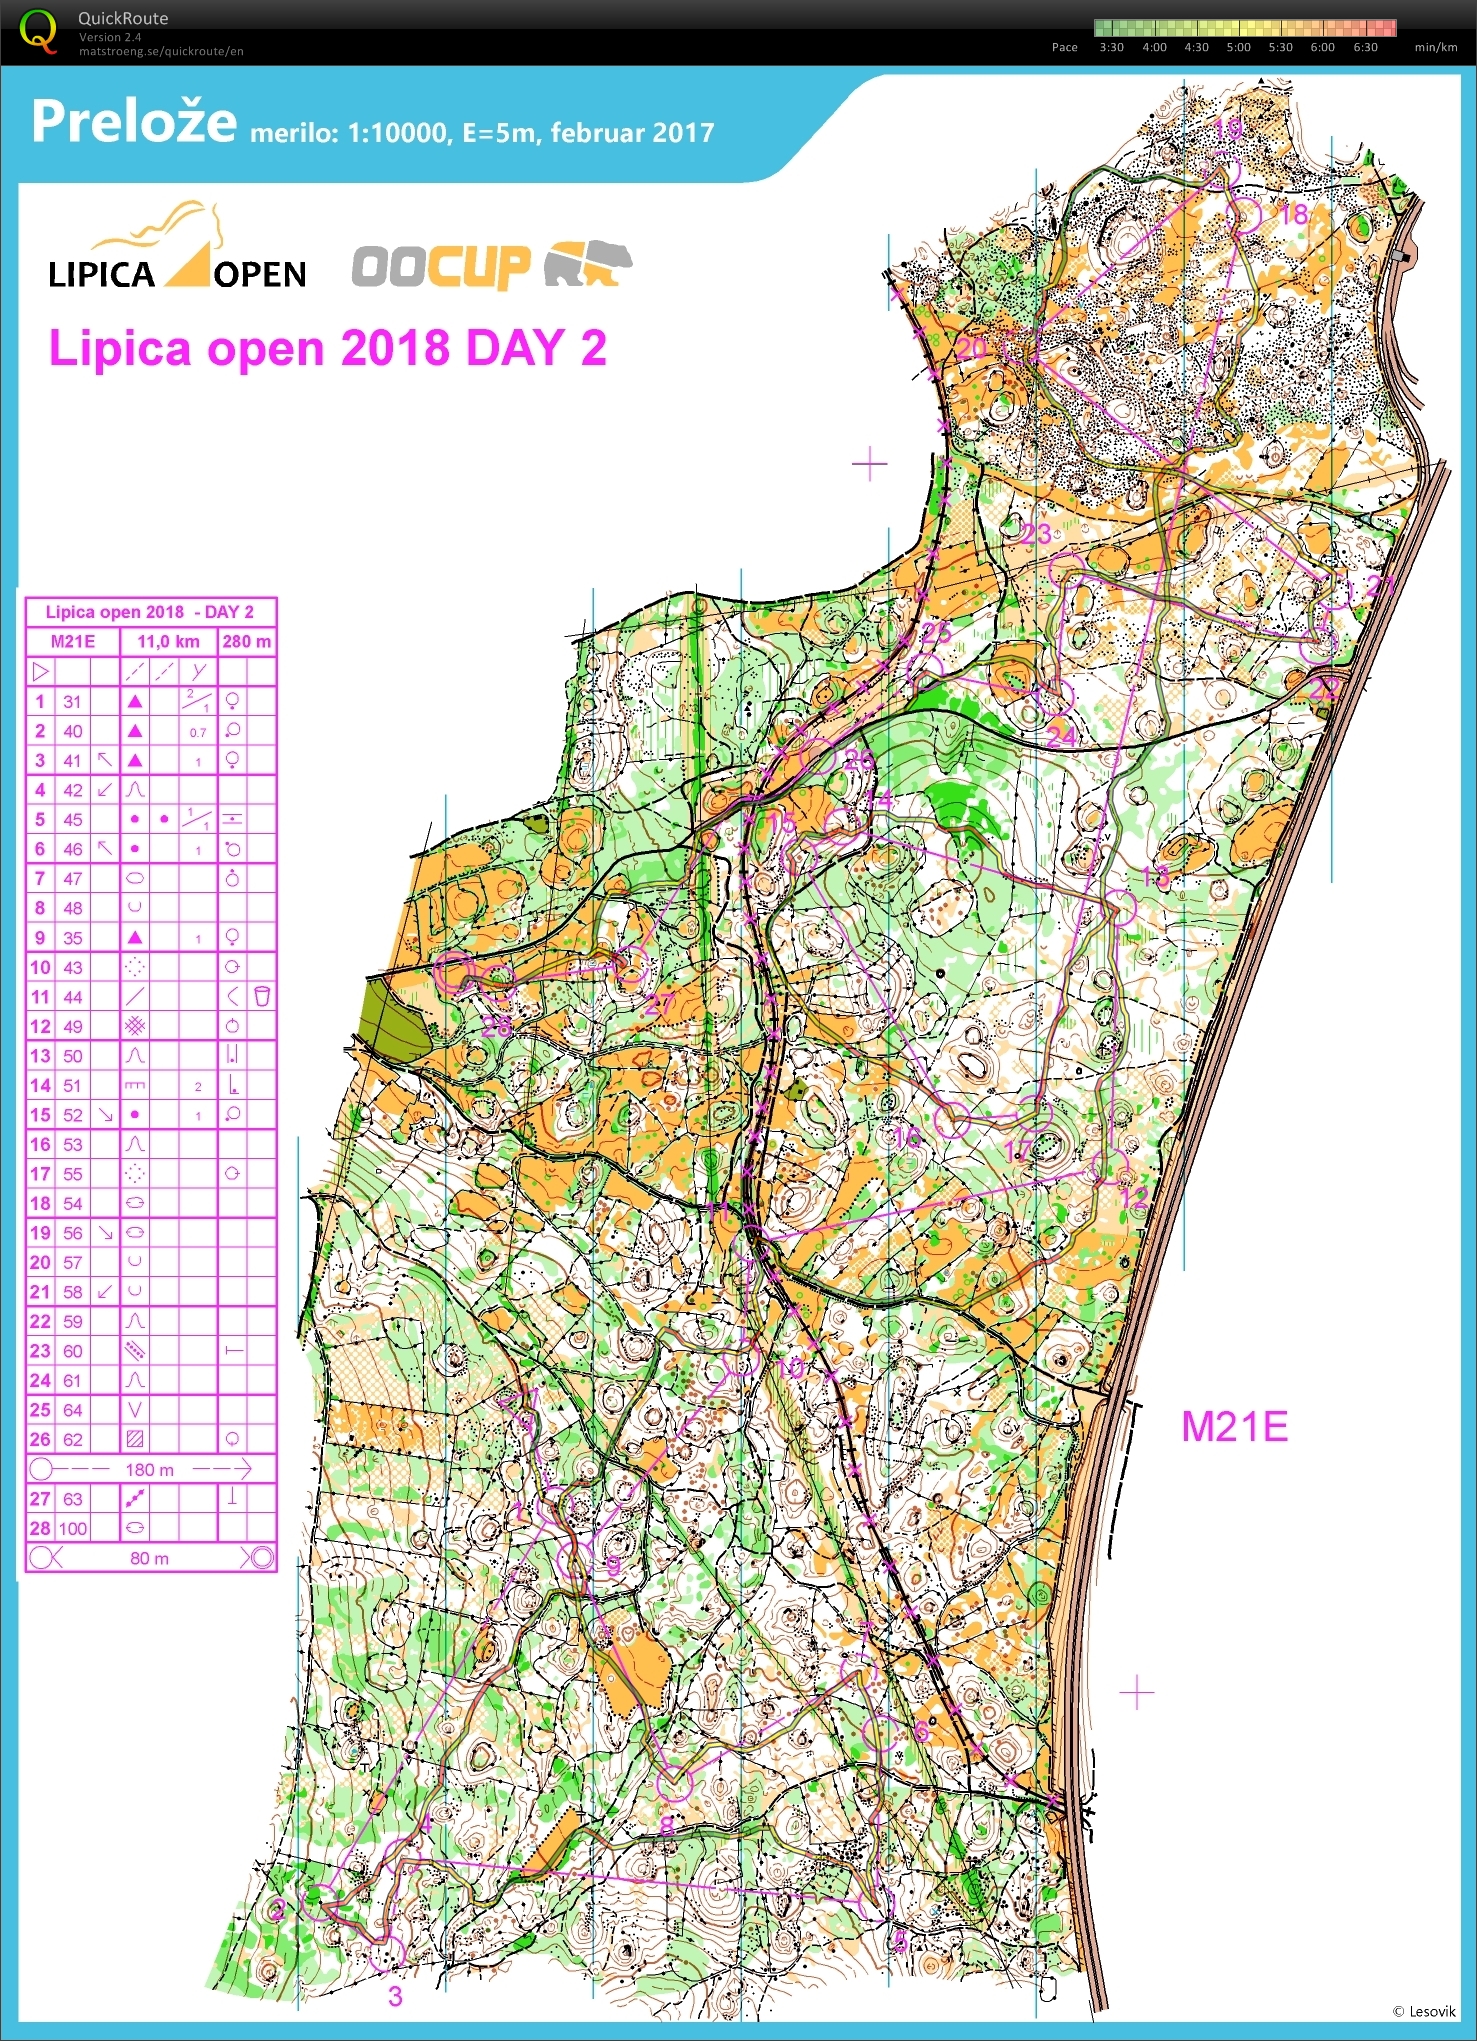 Lipica open day 2 (2018-03-11)